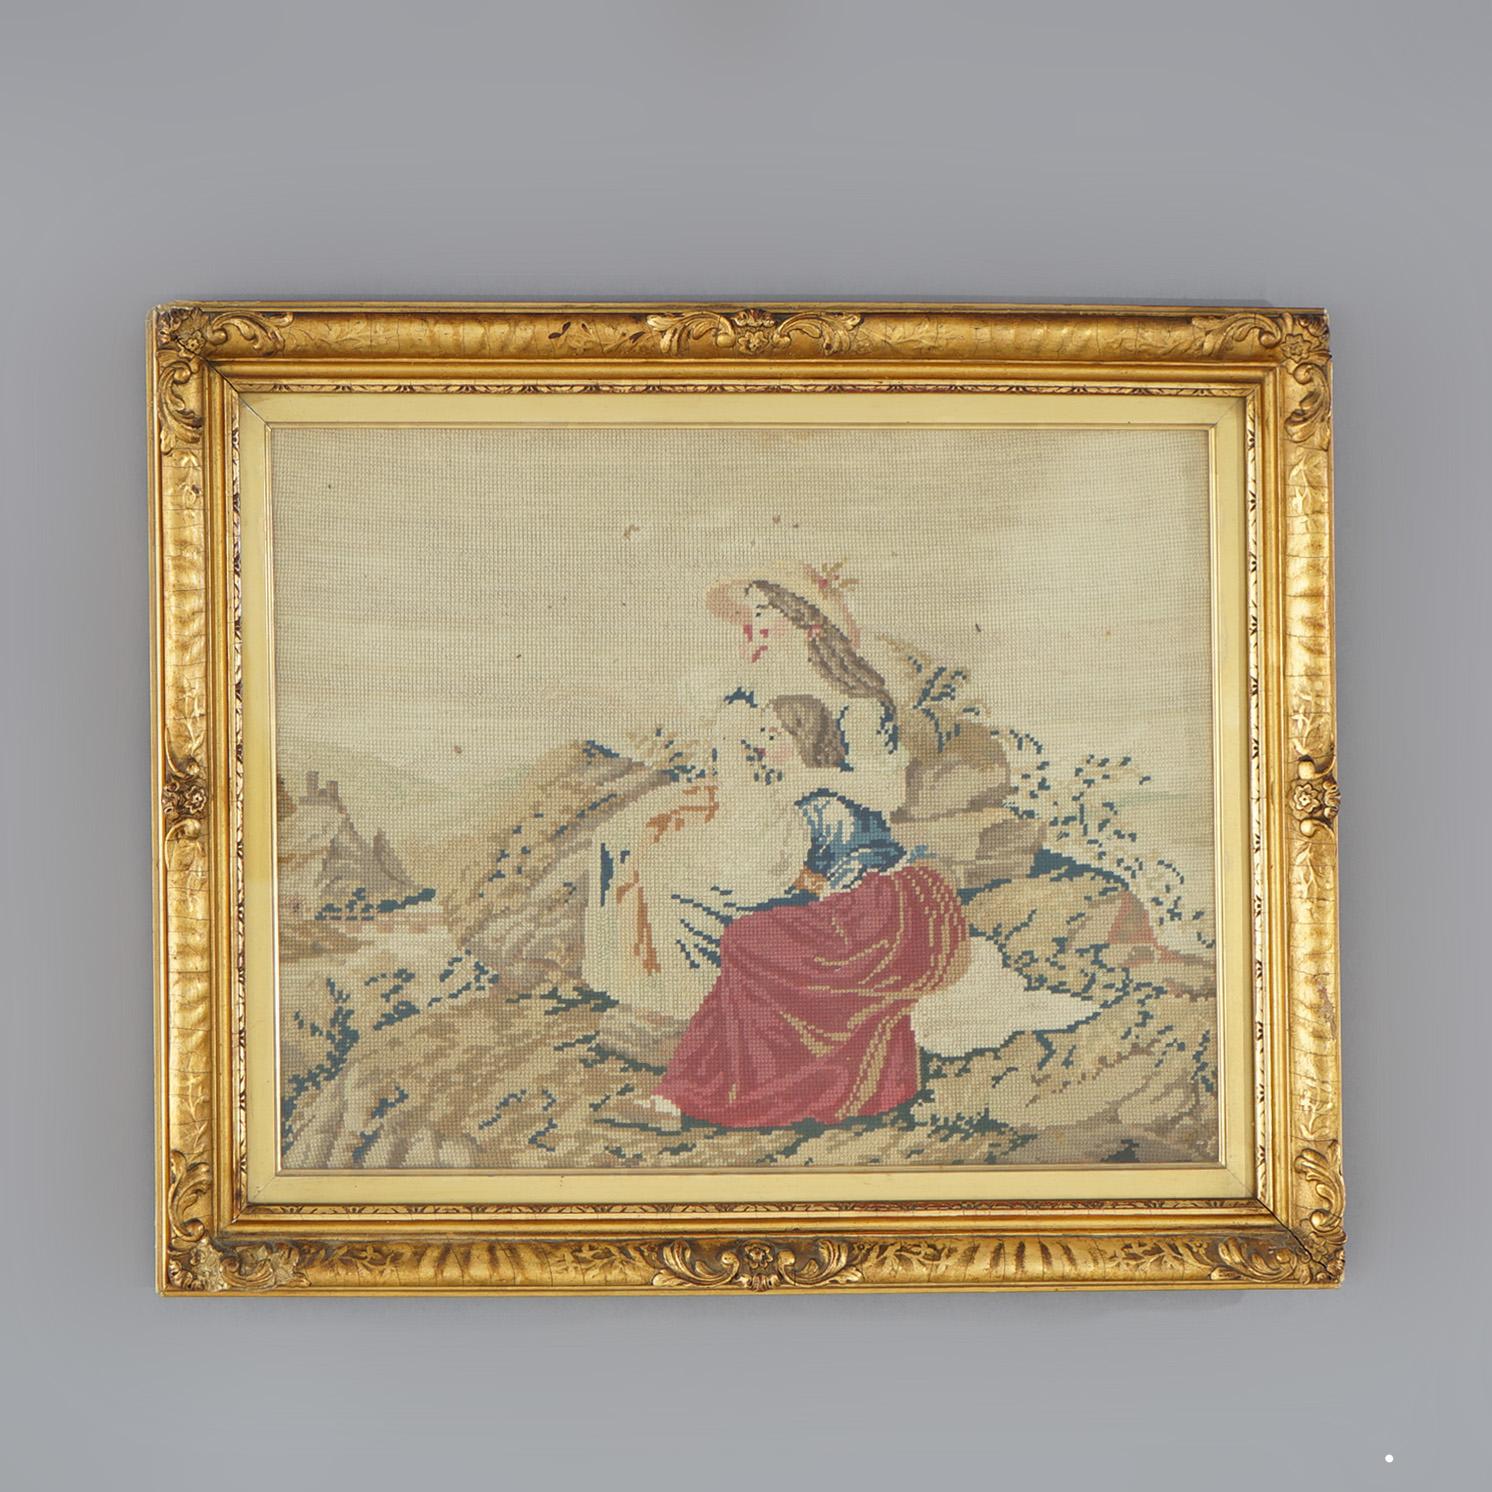 An antique Victorian needlework panel offers countryside scene with mother and daughter, seated in giltwood frame, signed Rudy Grovner, Circa 1900


Measures- 18.25''H x 22.25''W x 2''D; 14.75'' x 18.5'' sight